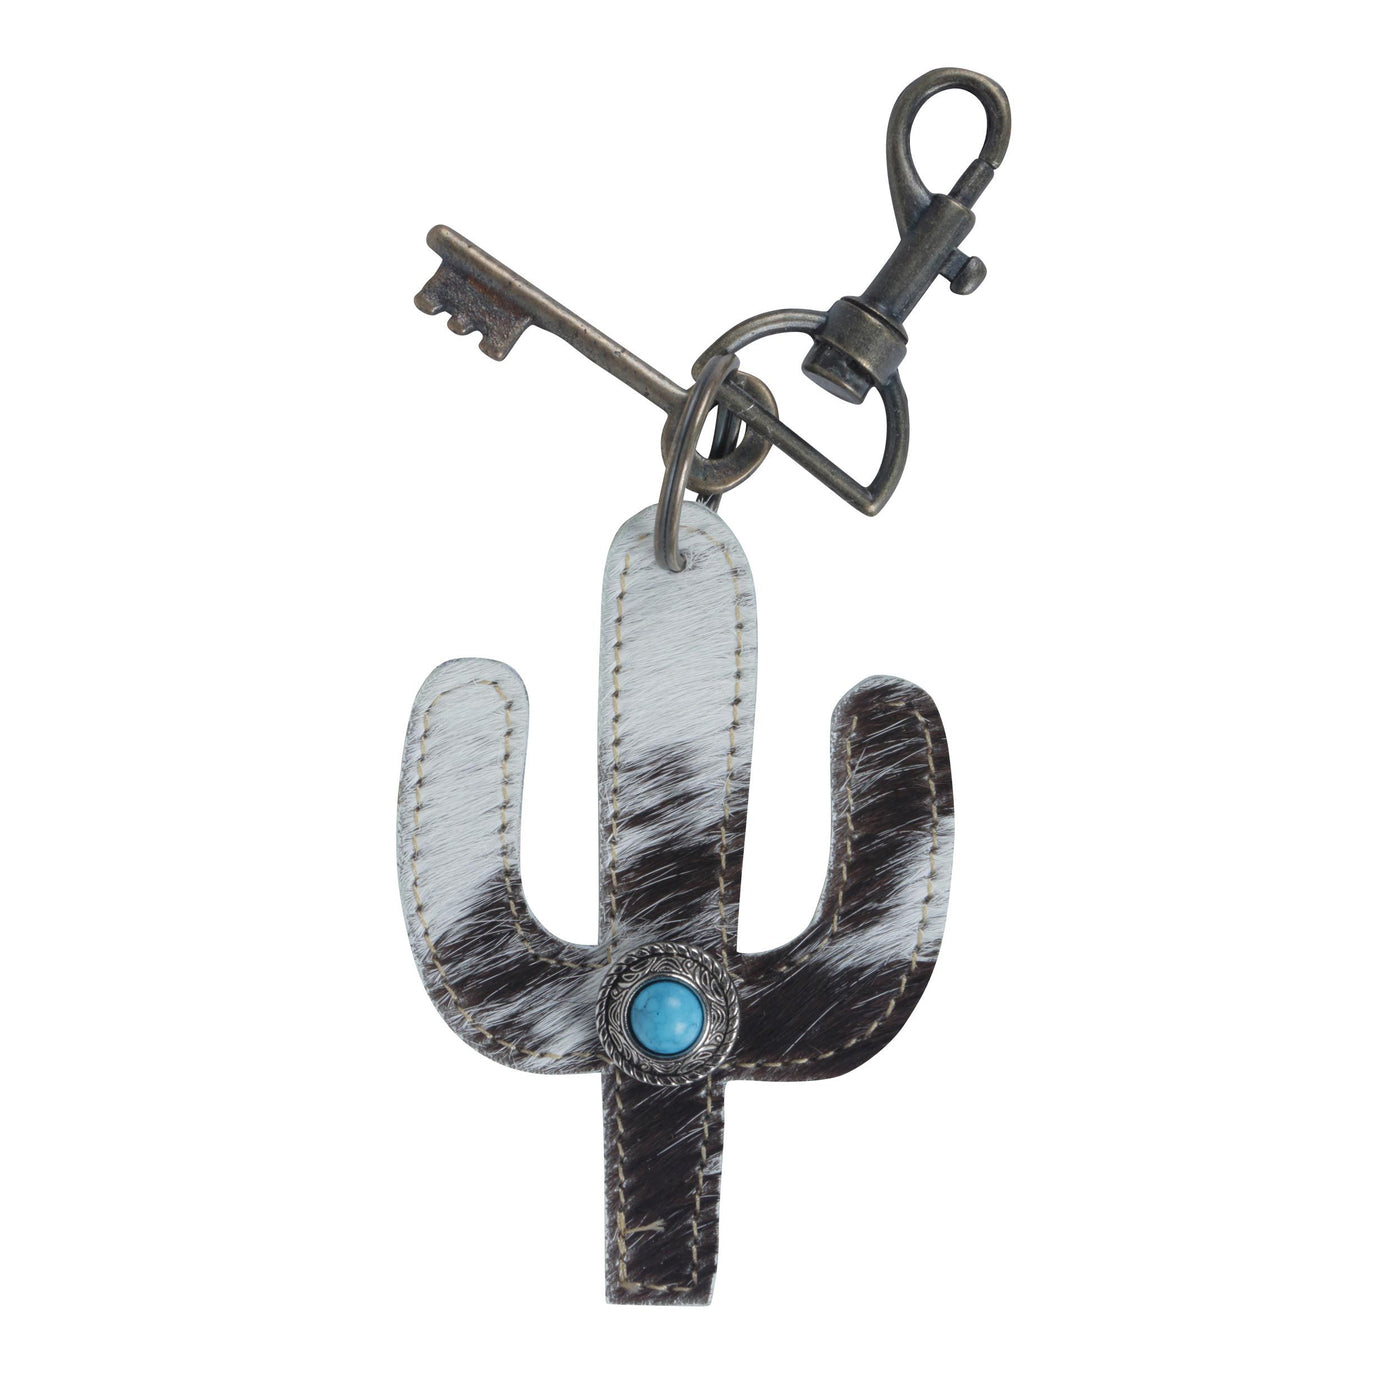 Key Ring - Genuine Leather Hair on Hide Turquoise Key Ring/ Bag Charm Cactus